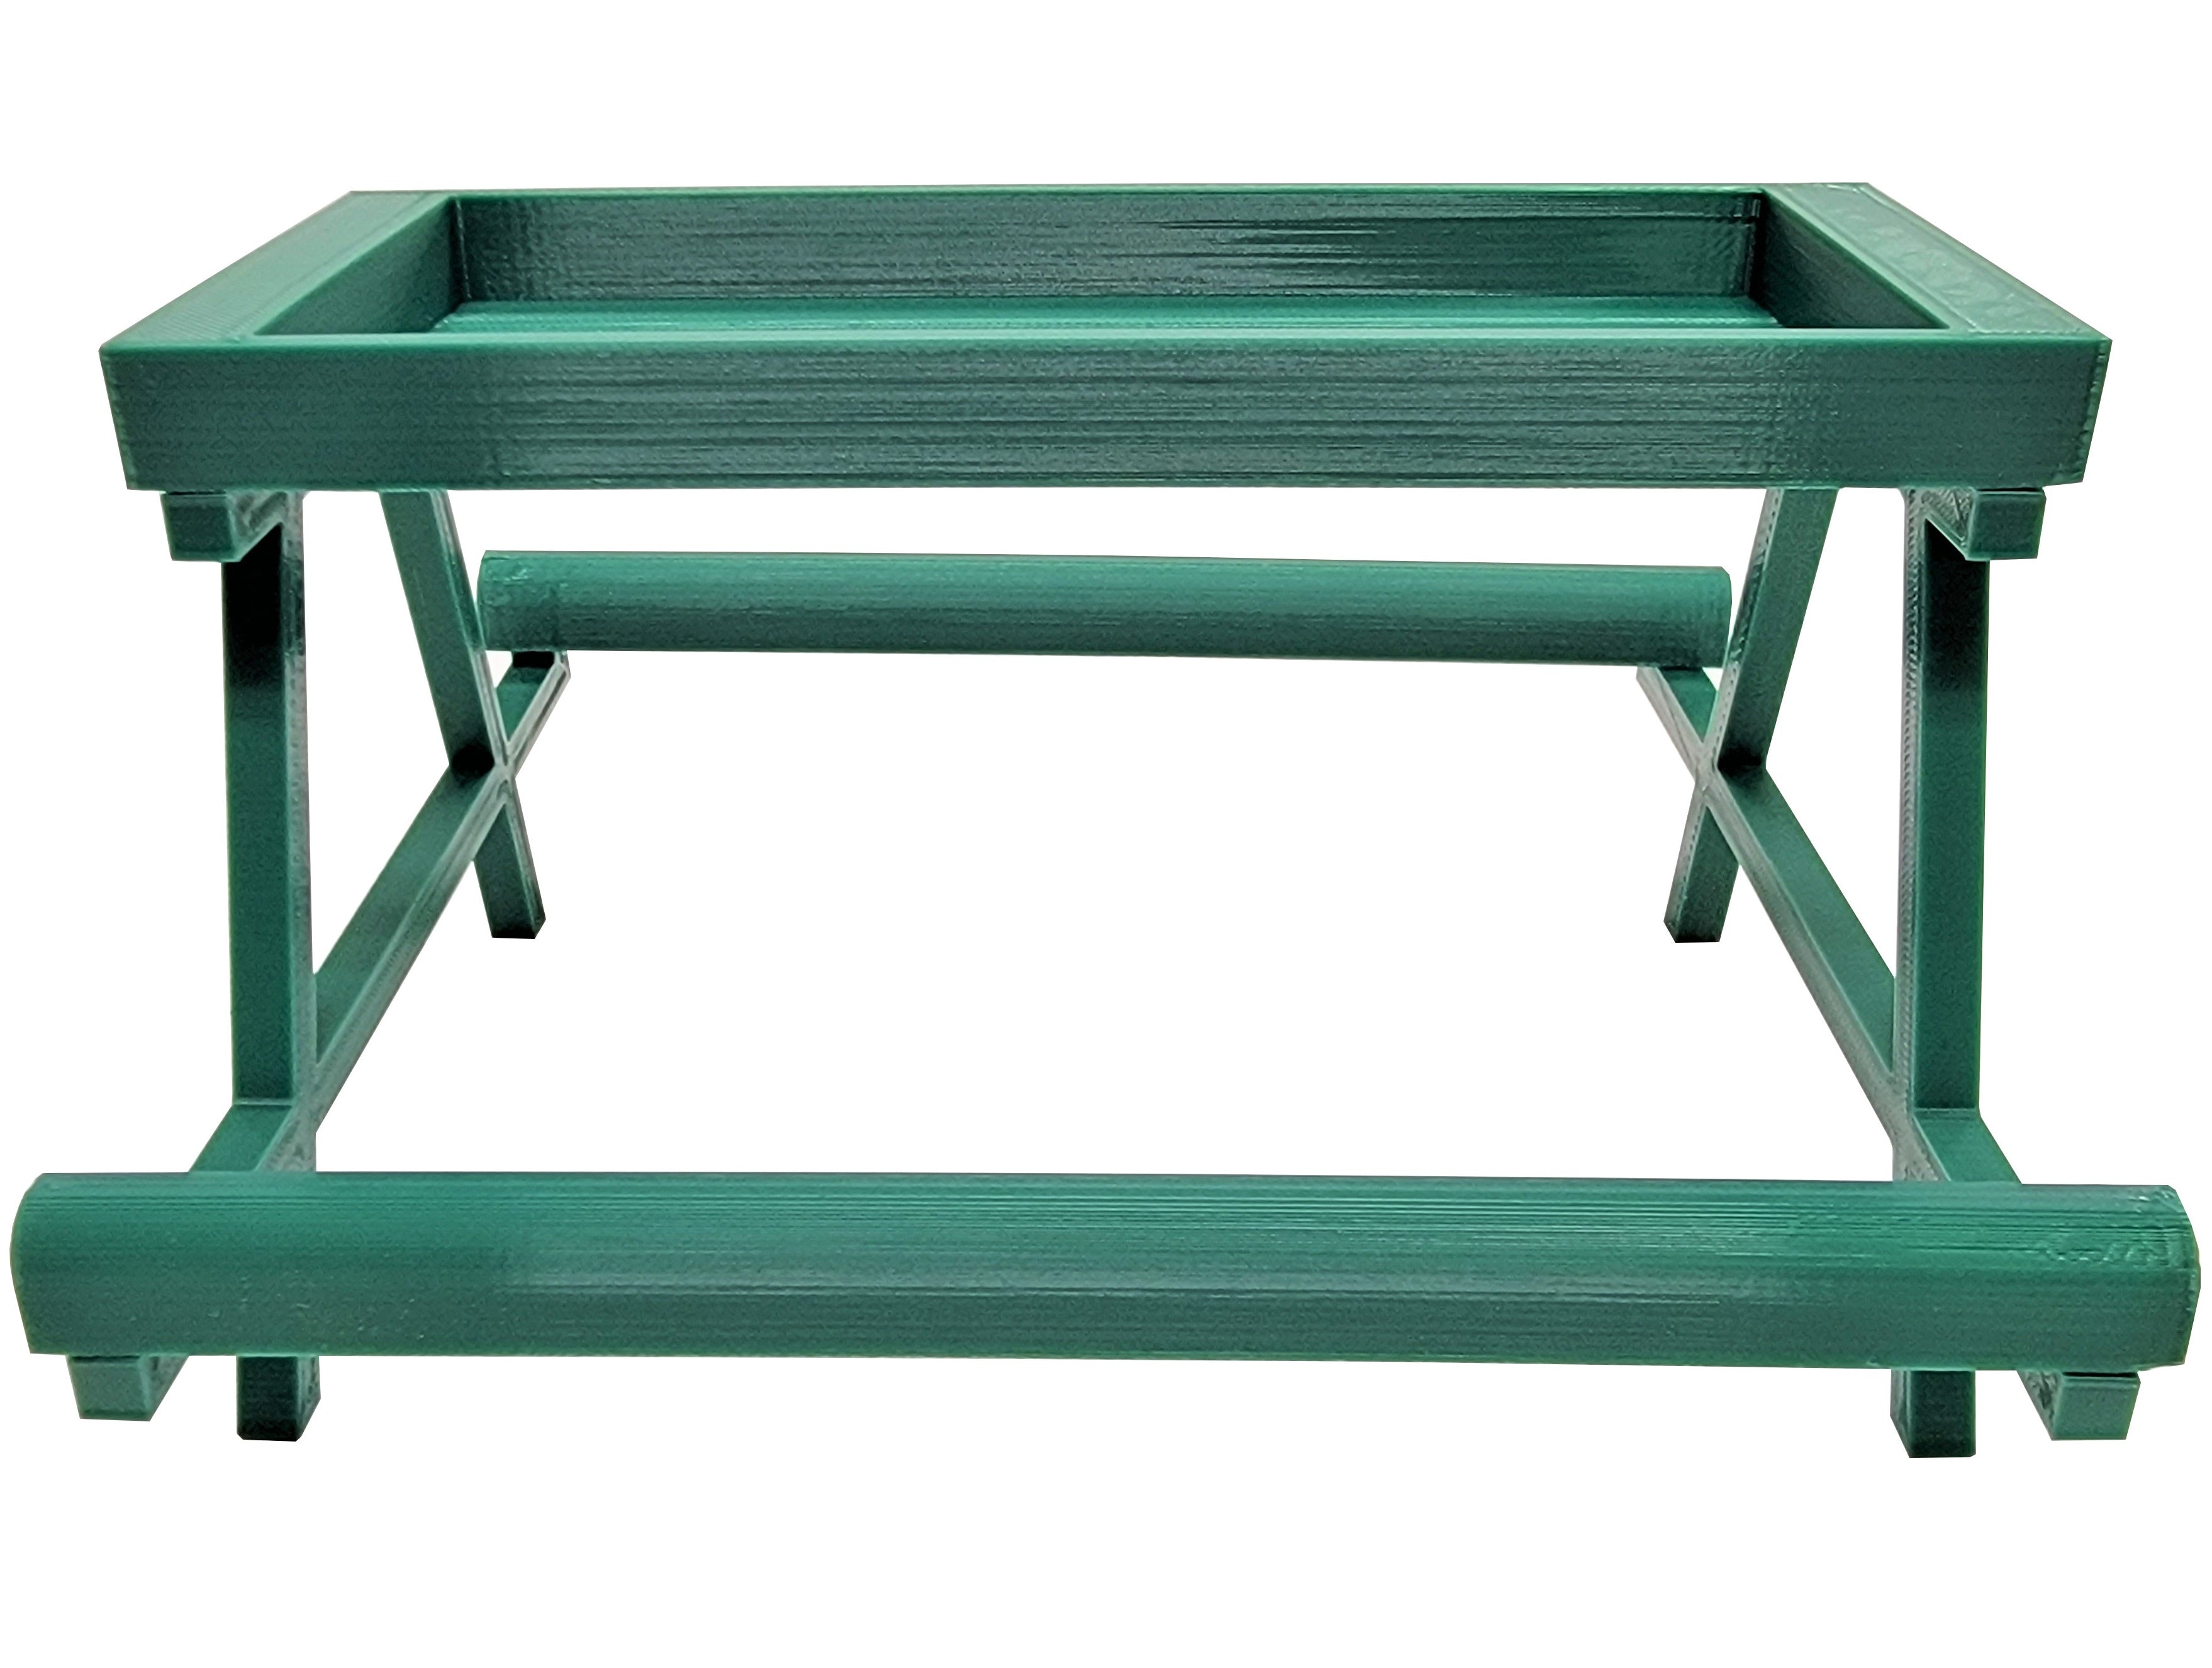 7 Inch Long Green Chick Picnic Table Chicknic Treat Feeder Bench